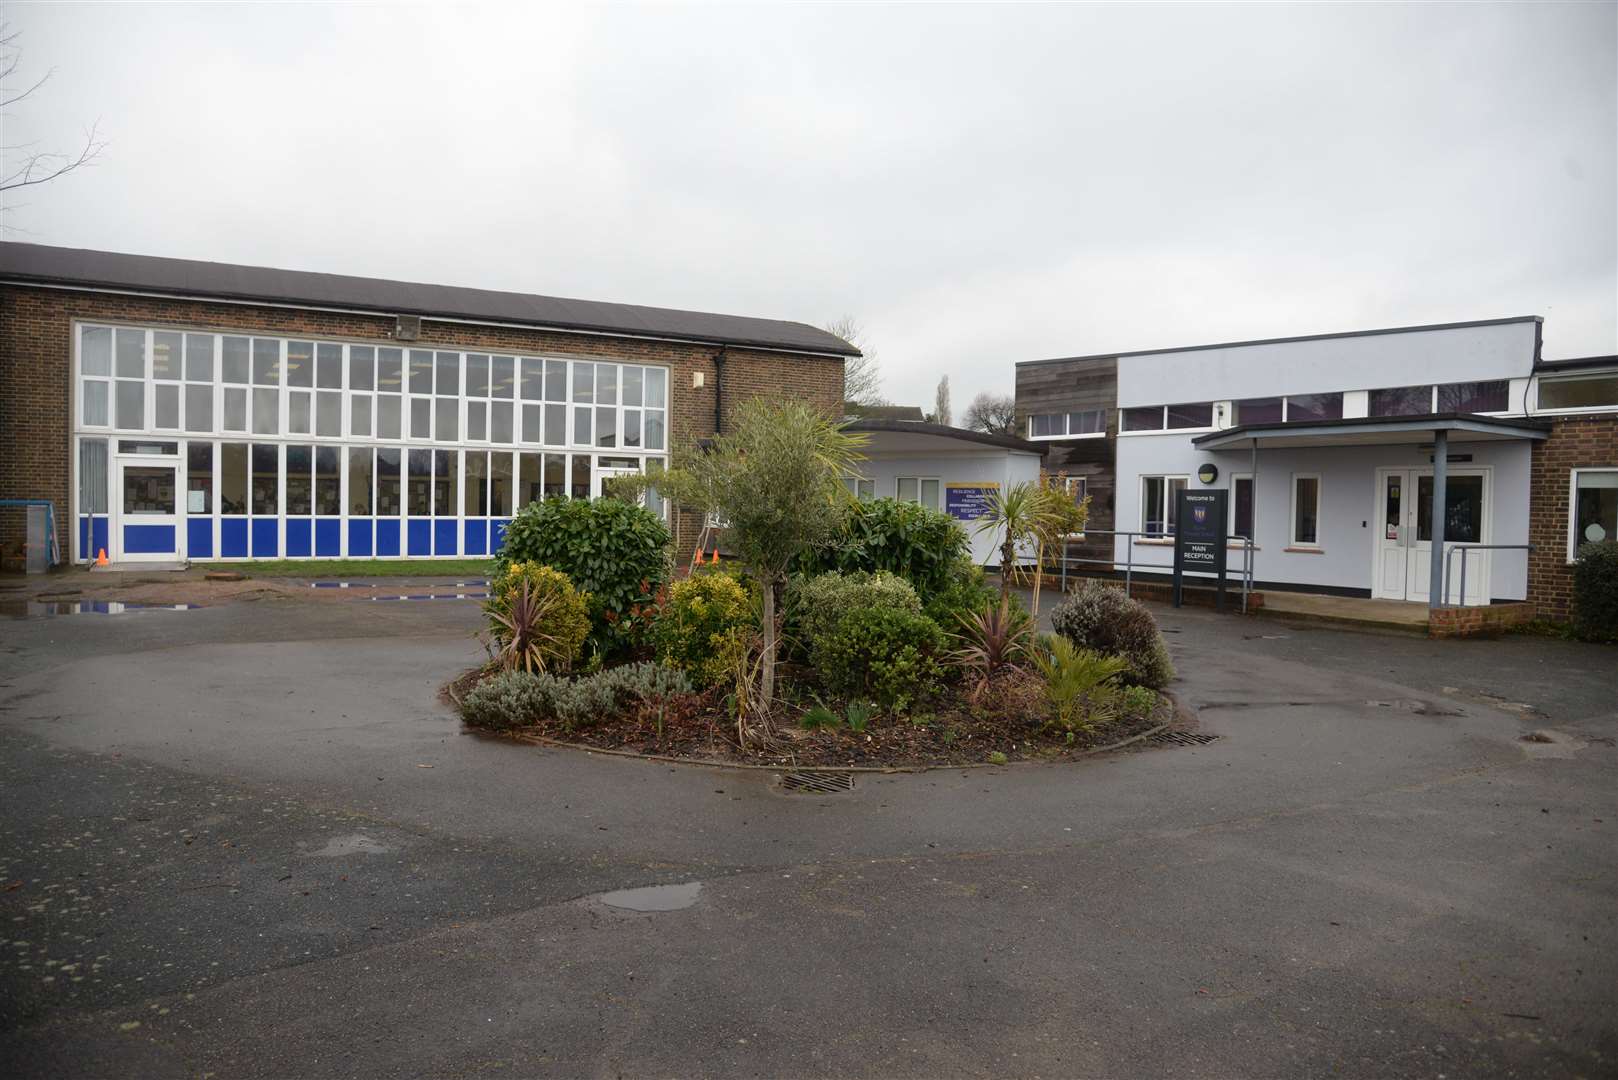 Elaine Primary School, Strood which has turned around exam results to become "most improved" in Kent. Picture: Chris Davey